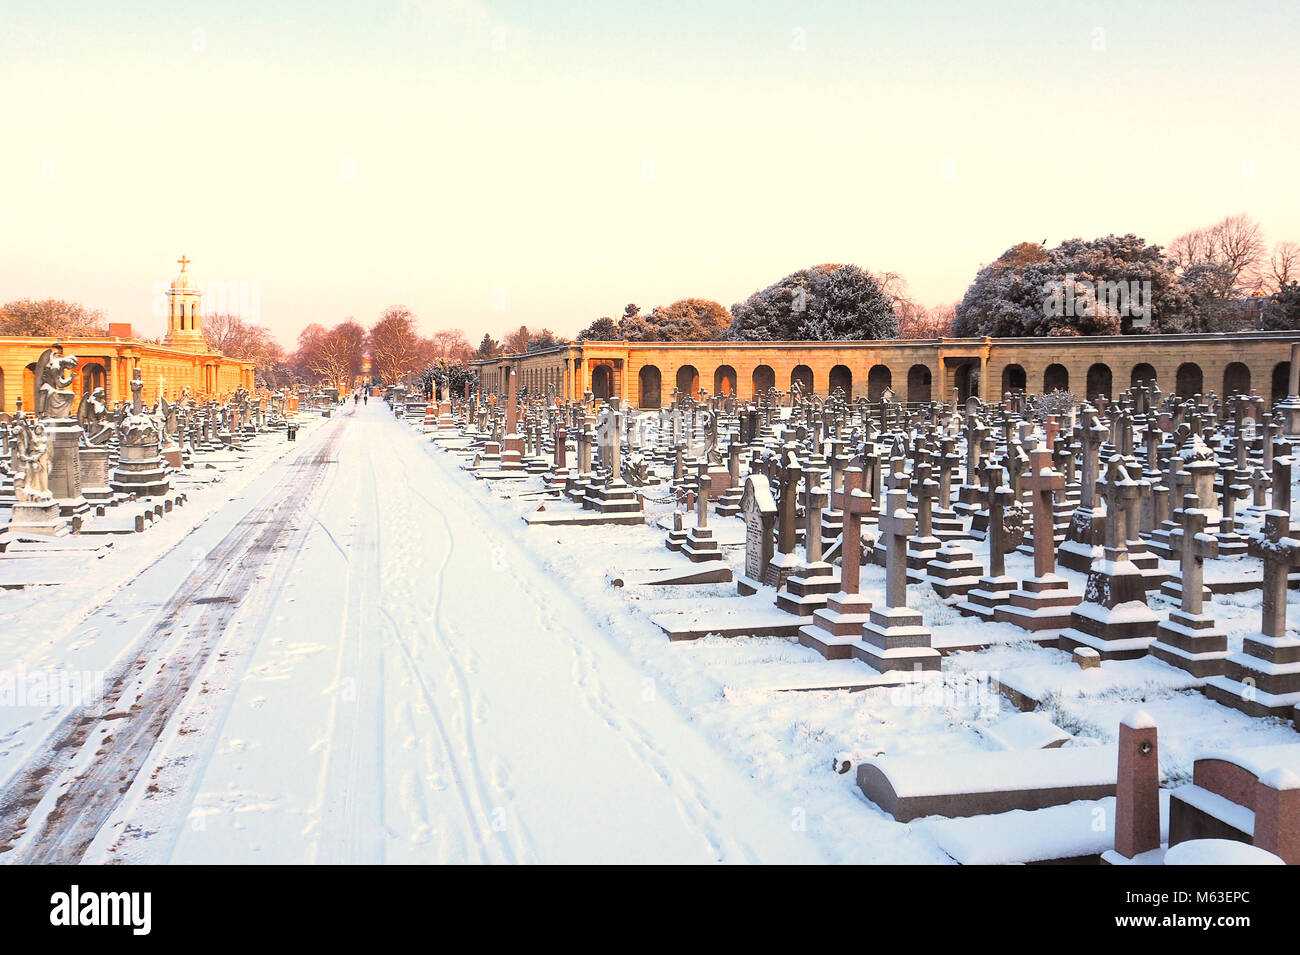 London, UK. 28th Feb, 2018. UK Weather: Central London was blanketed in snow as the cold weather front swept across South East England.Brompton Cemetery © Brian Minkoff / Alamy Live News Stock Photo